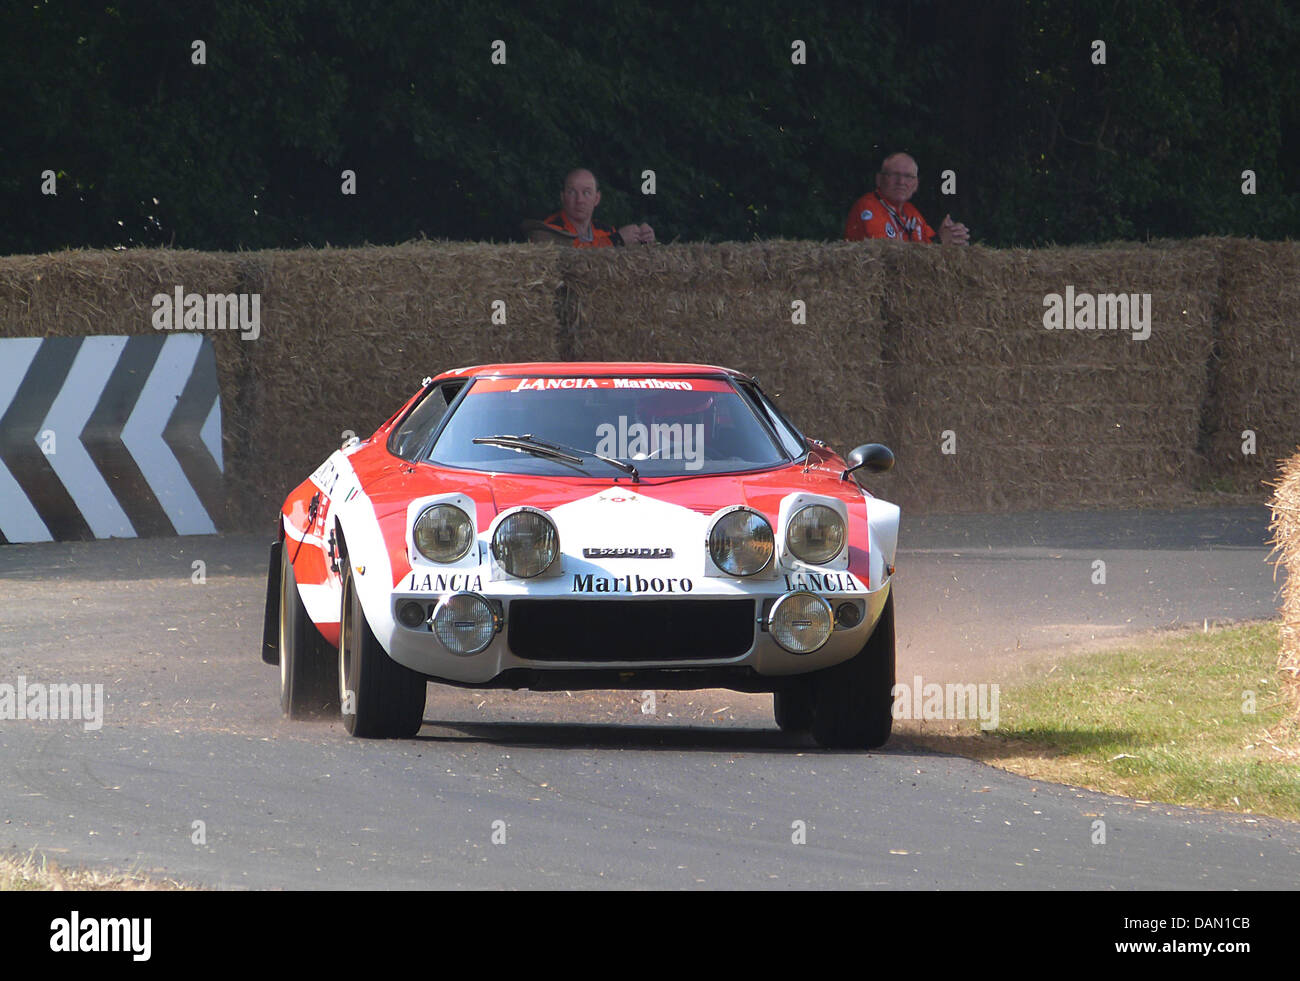 Lancia Stratos à Goodwood Festival of Speed 2013 Banque D'Images